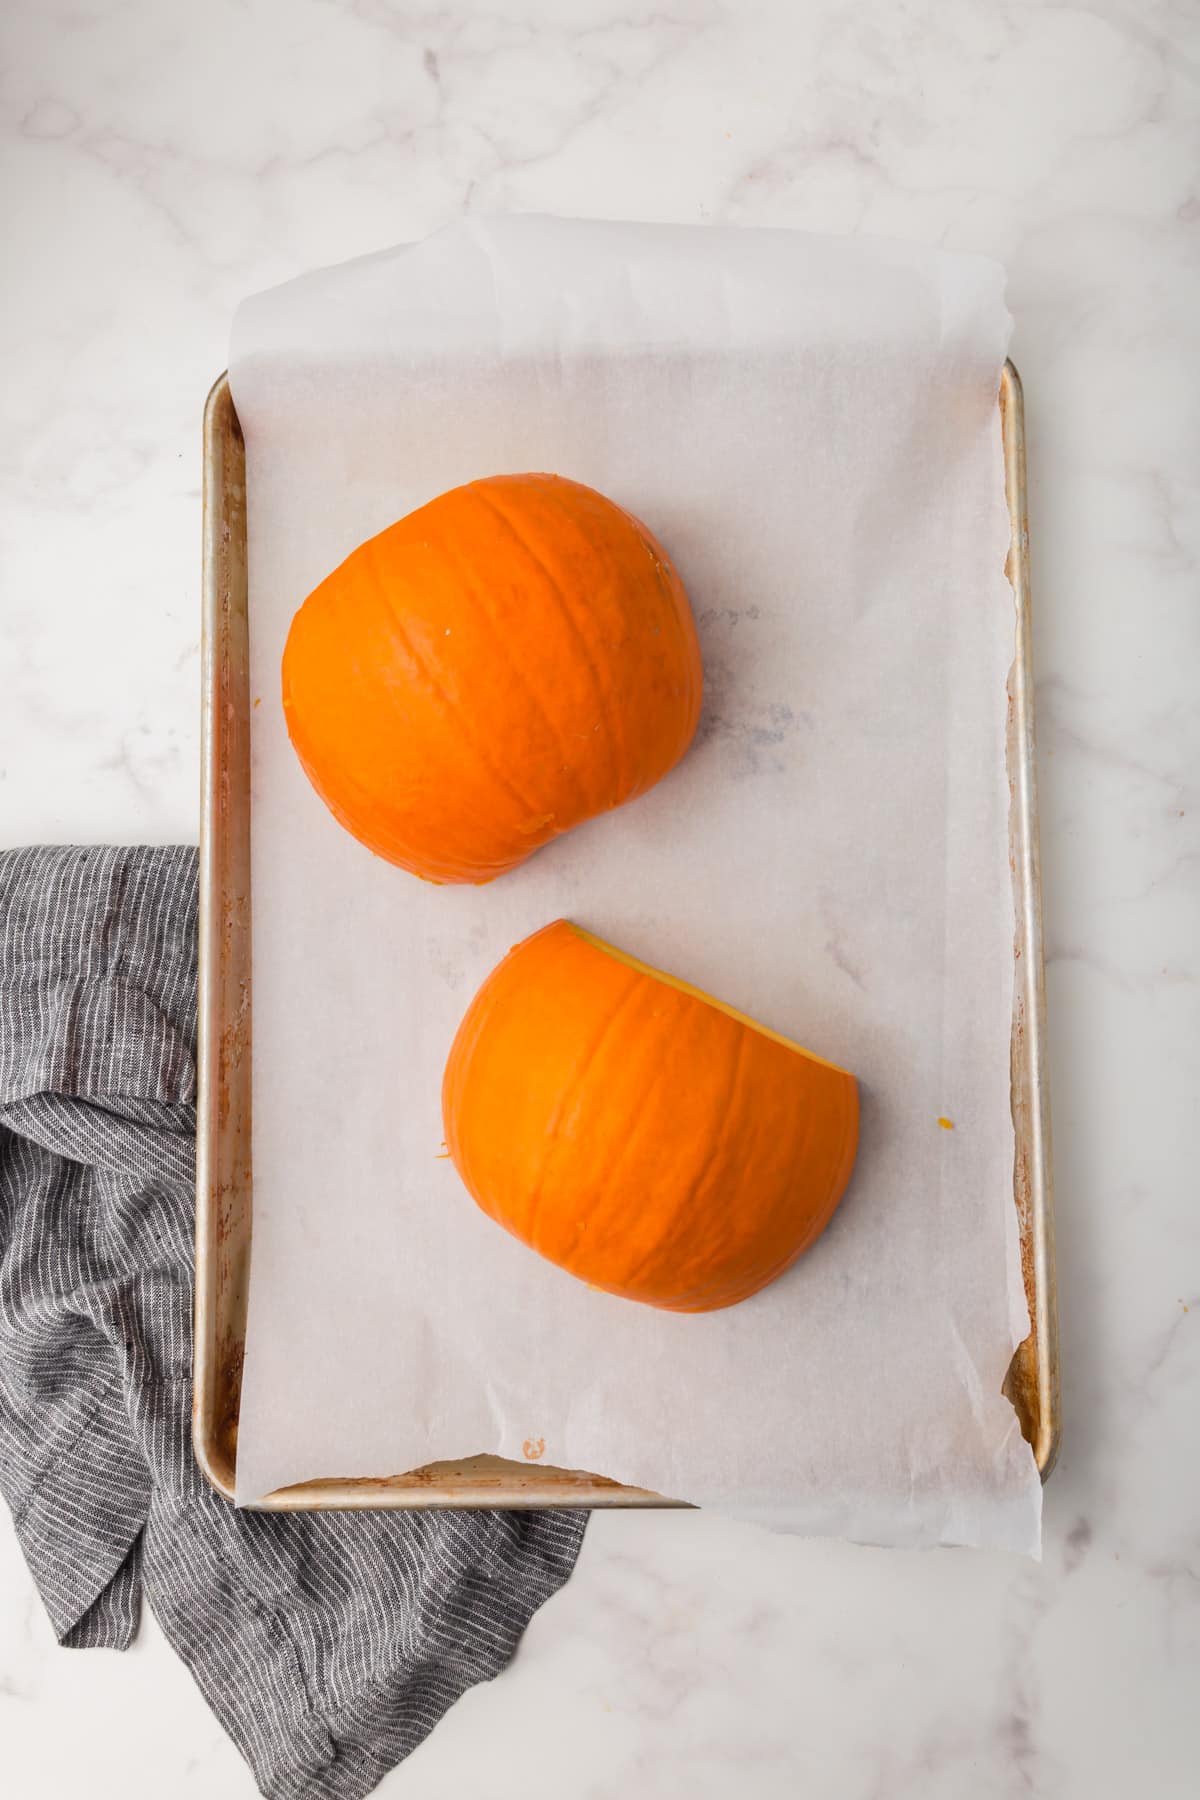 A baking sheet lined with parchment paper with two sugar pumpkin halves on it before cooking in the oven.